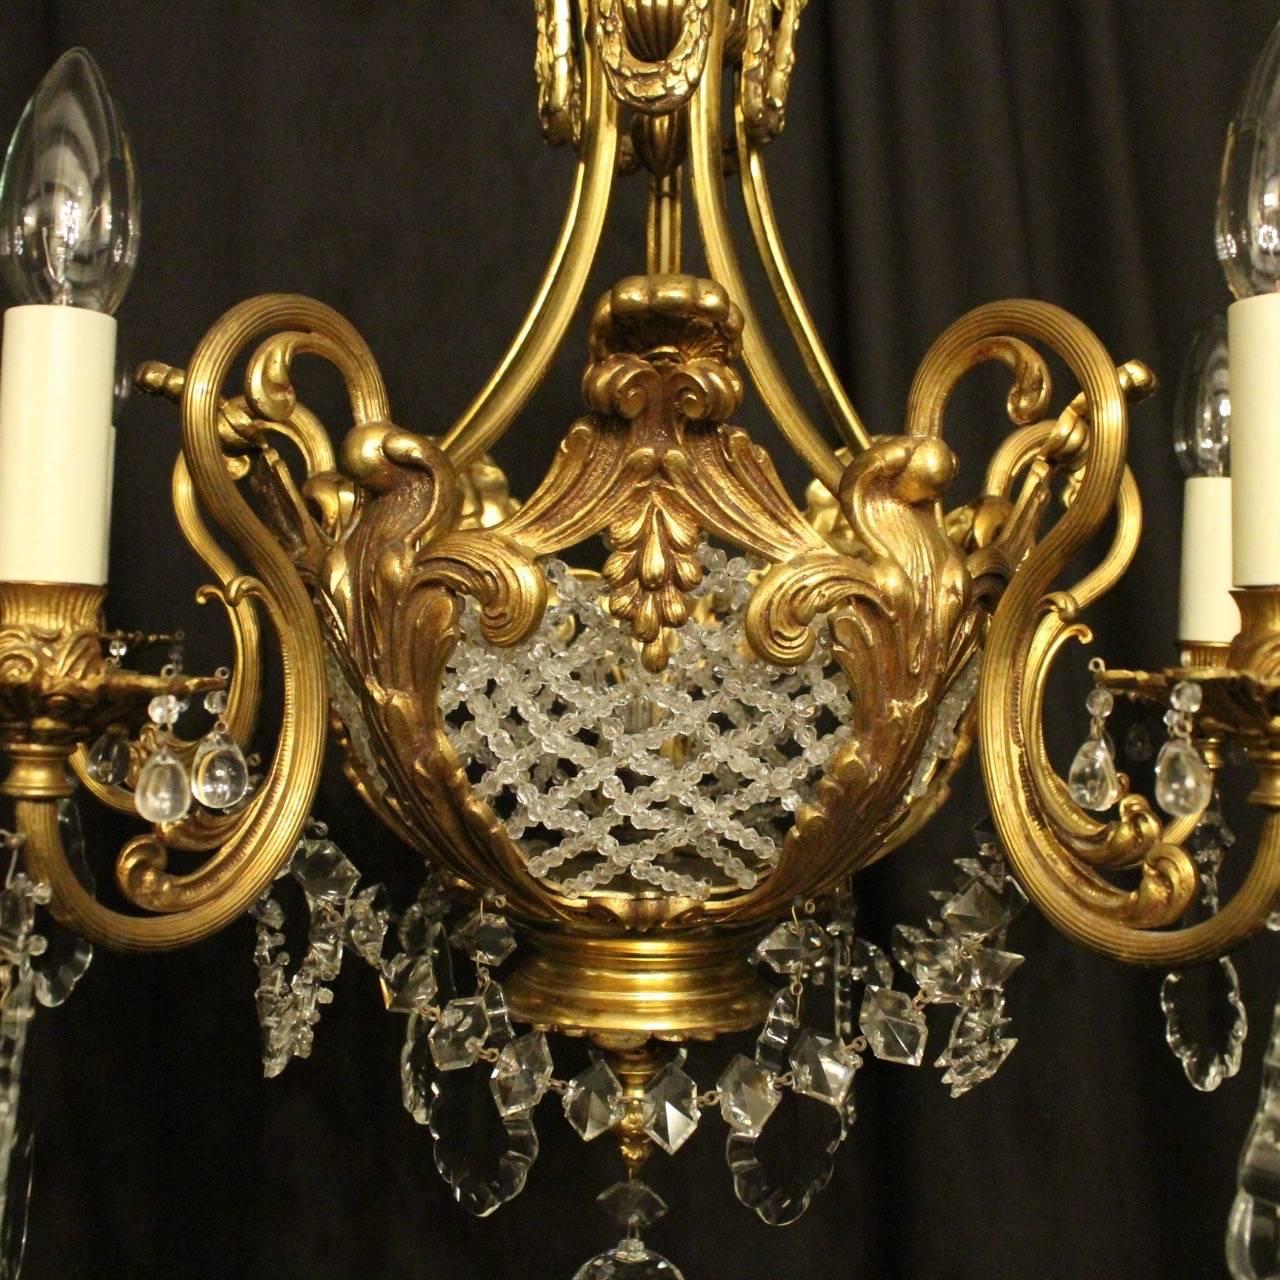 A French gilded bronze and crystal six-light birdcage form antique chandelier, the five ornate leaf and reeded scrolling arms with foliated bobeche drip pans and bulbous candle sconces, issuing from a cage form interior decorated with lovely cut